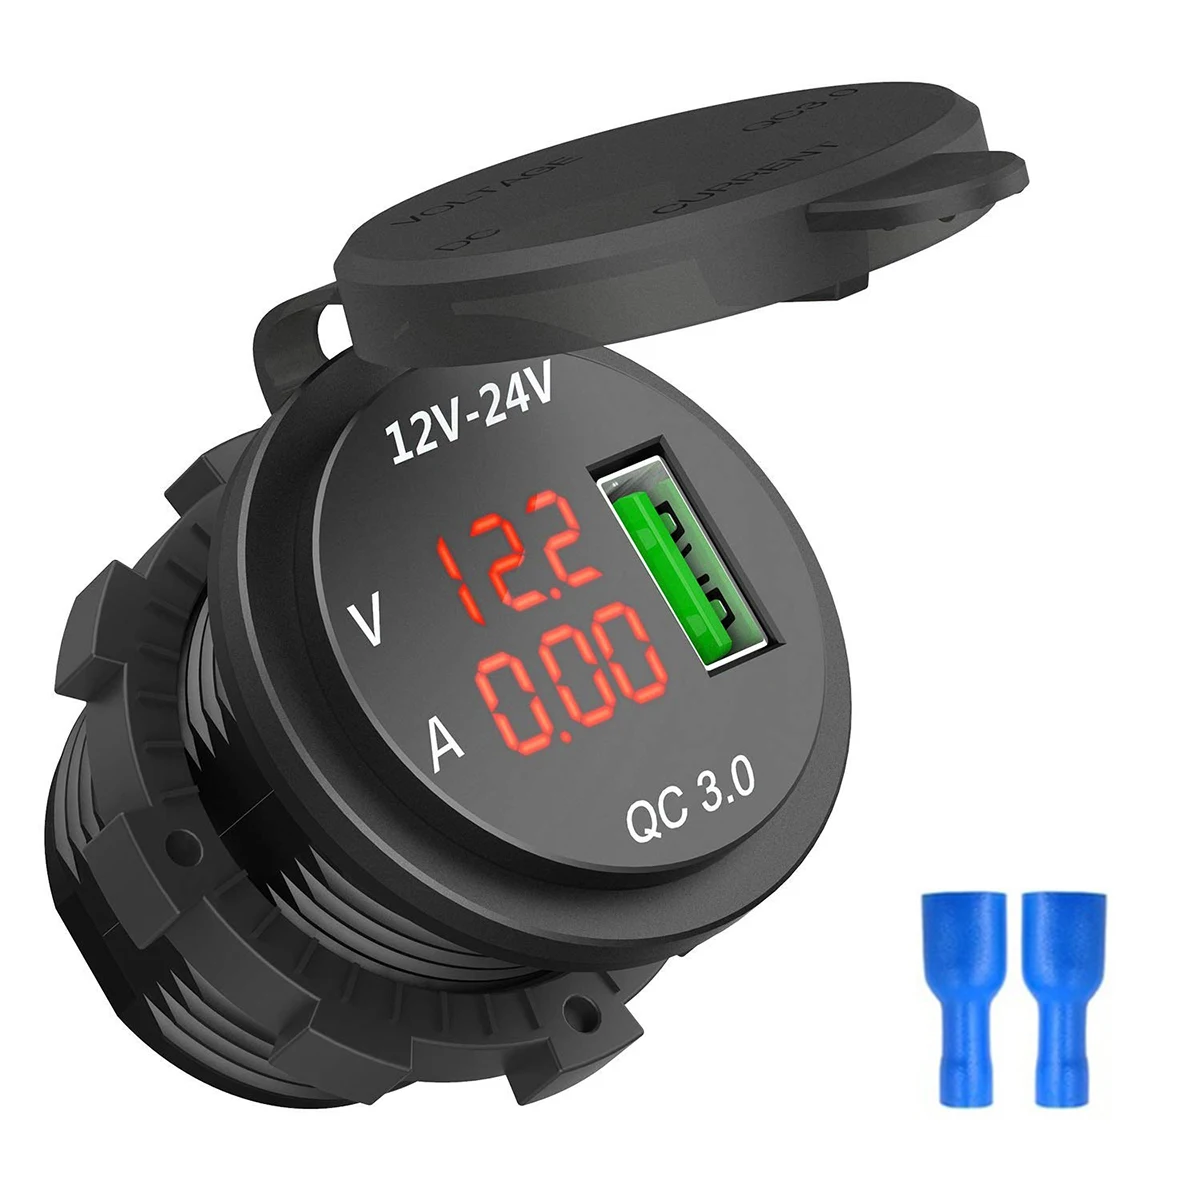 

5V/3A Quick Charge USB Charger LED Display Voltmeter Car QC 3.0 Quick Charge Charger For DC 12-24V Car Boat Motorcycle